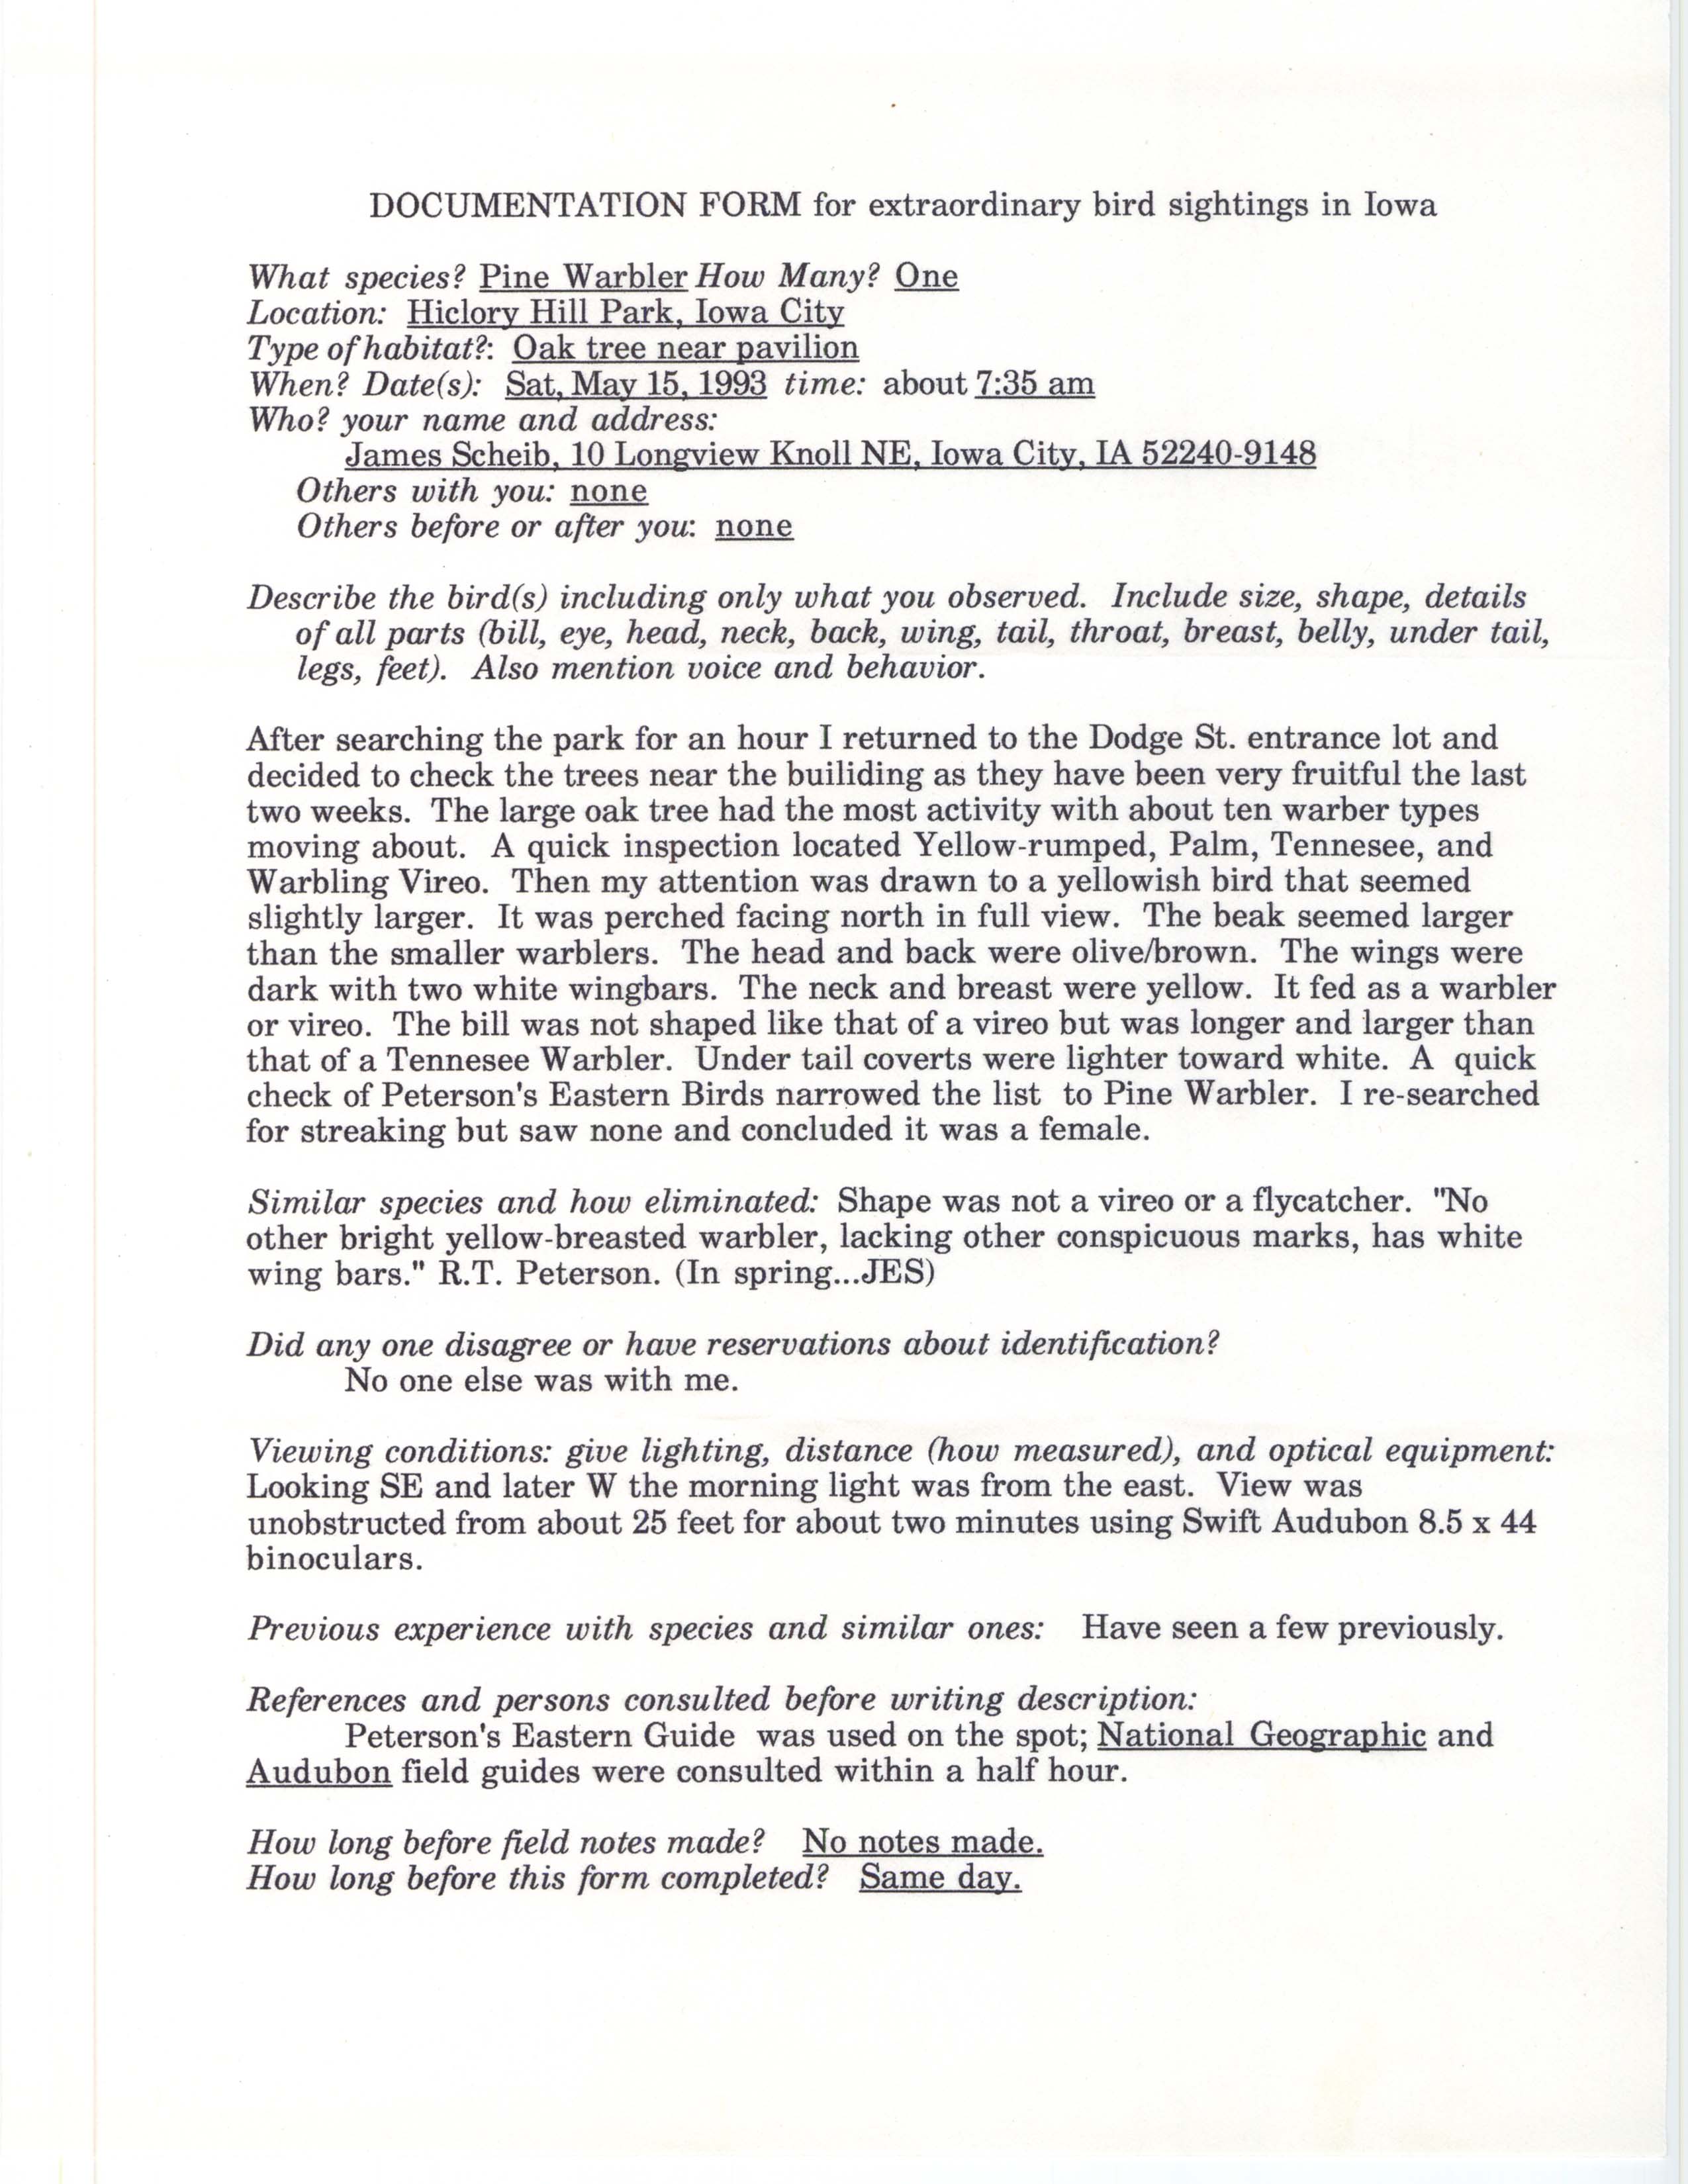 Rare bird documentation form for Pine Warbler at Hickory Hill Park in Iowa City, 1993